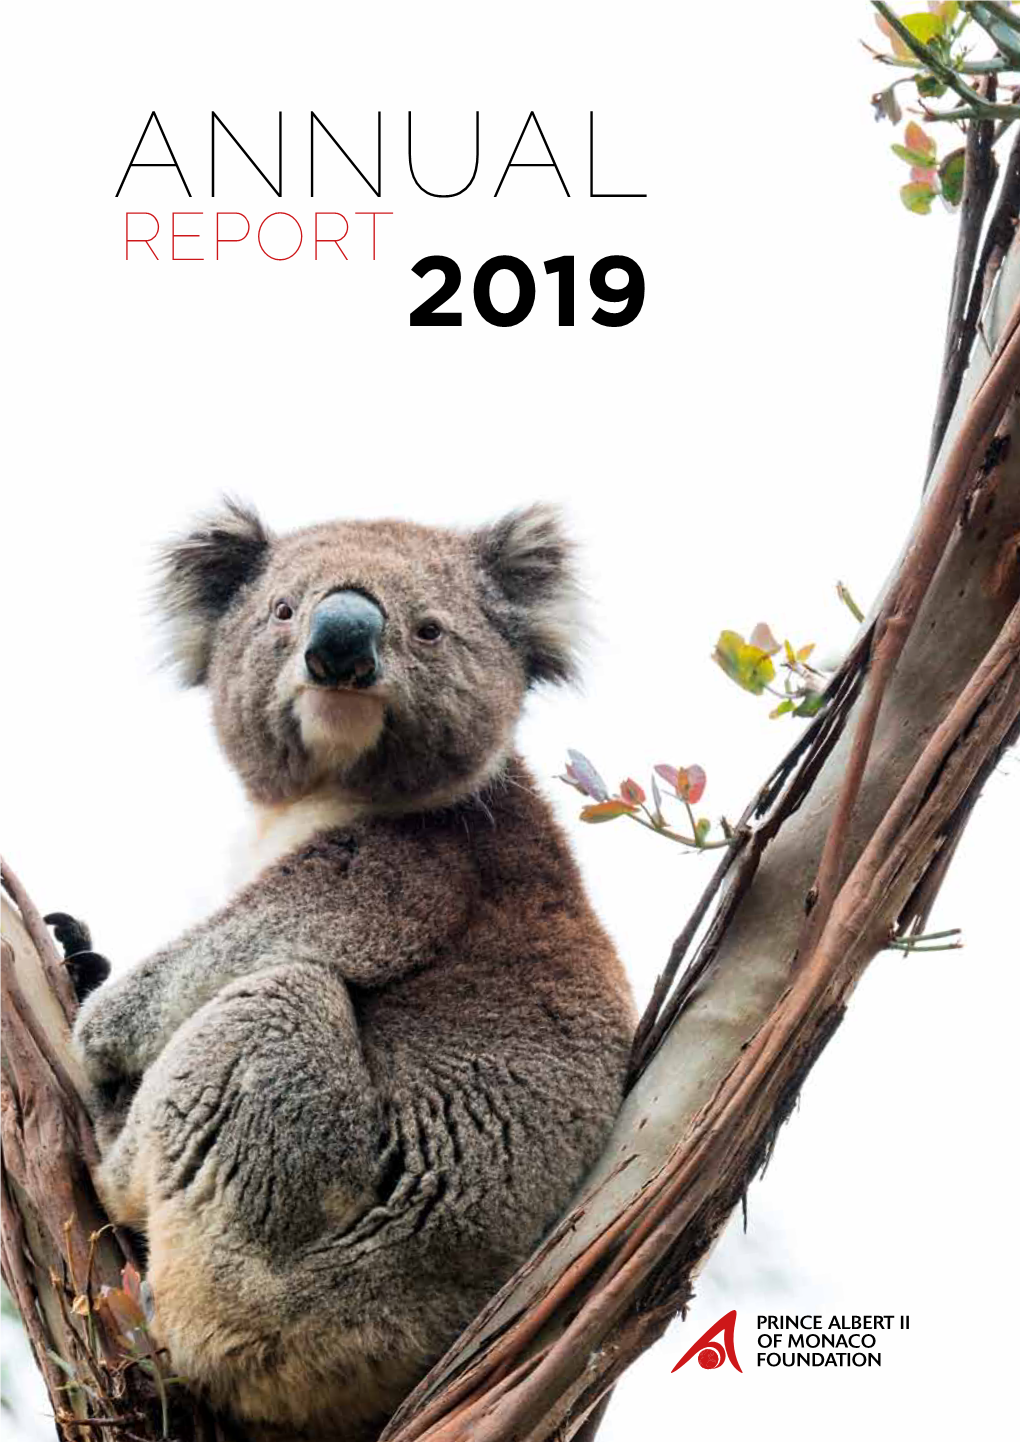 ANNUAL REPORT 2019 Taking Positive Action Means First of All Creating a Shared Destiny